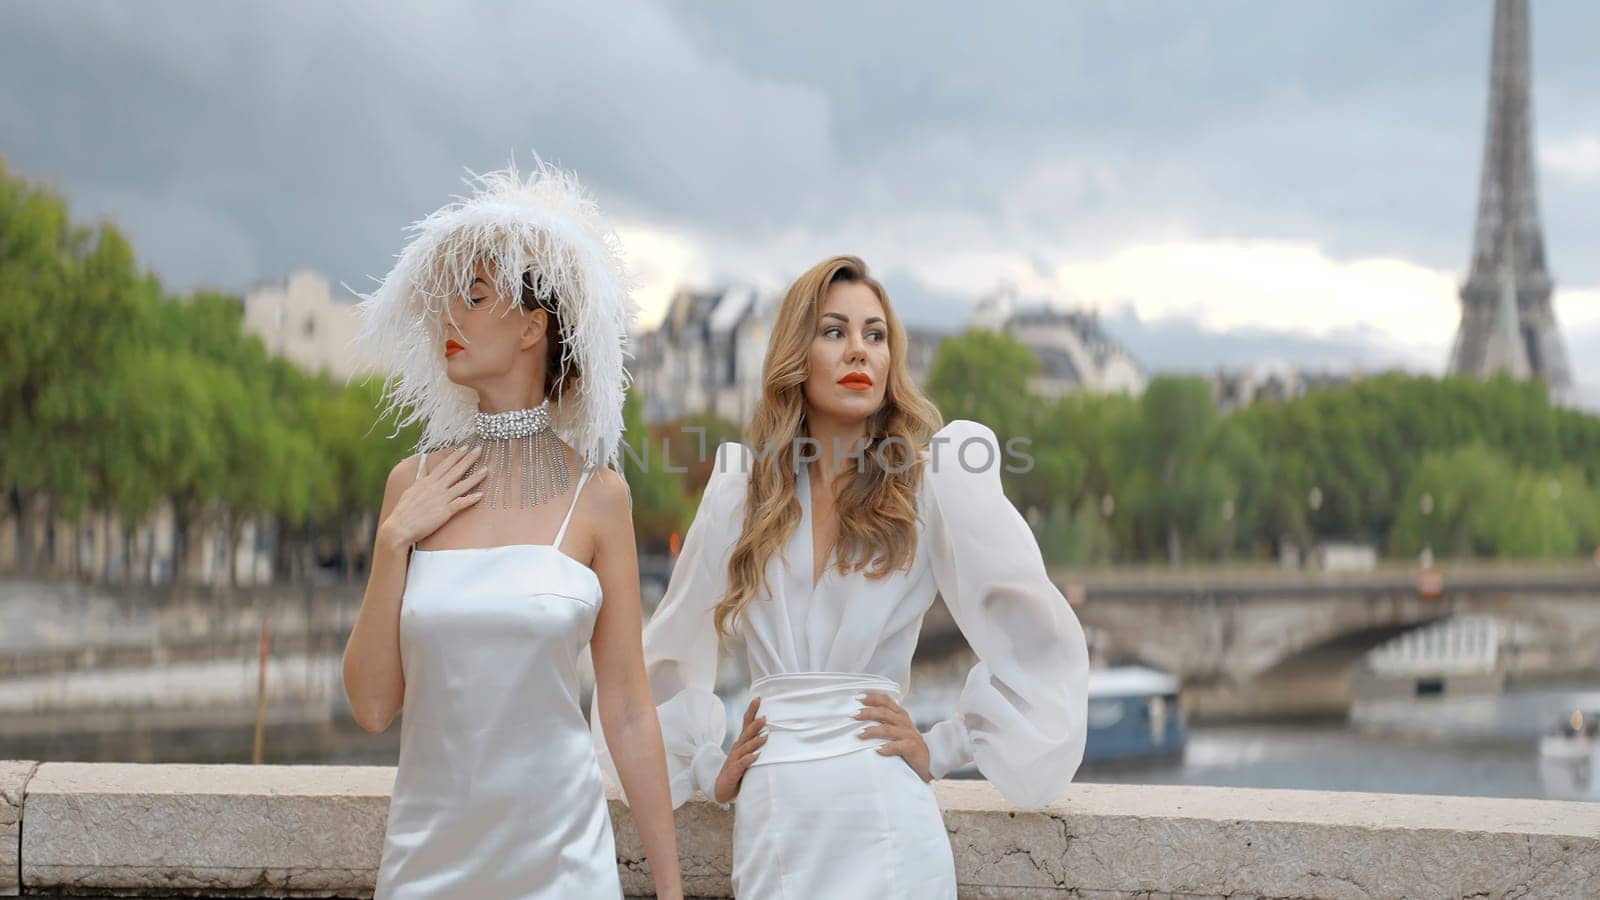 Stylish models in white dresses posing on the background of Paris streets and Effel tower. Action. Women in elegant dresses outdoors, one of them wearing a hat with feathers